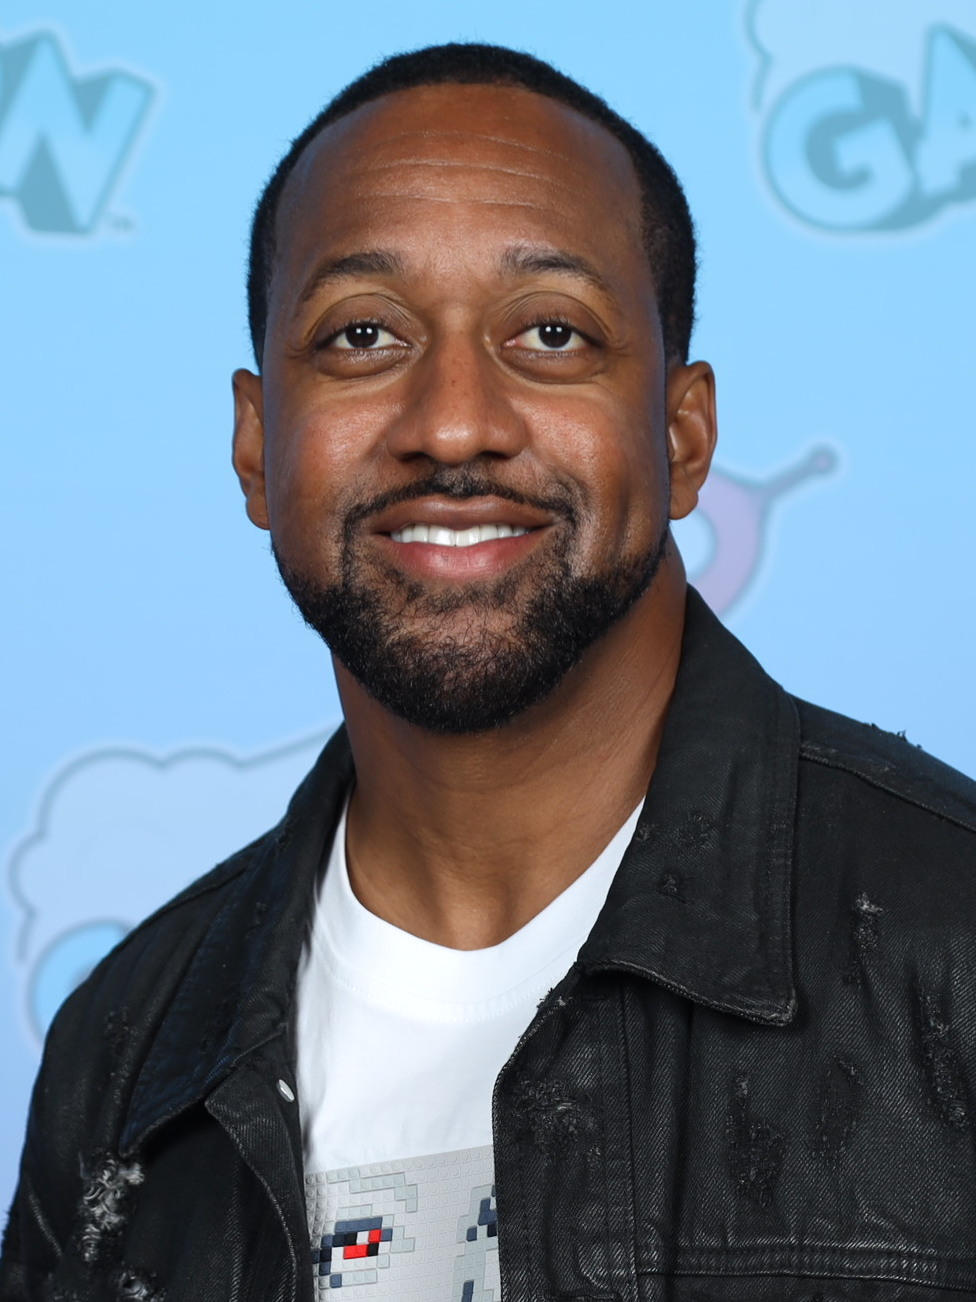 https://upload.wikimedia.org/wikipedia/commons/3/38/Jaleel_White_Photo_Op_GalaxyCon_Raleigh_2023_%28cropped%29.jpg